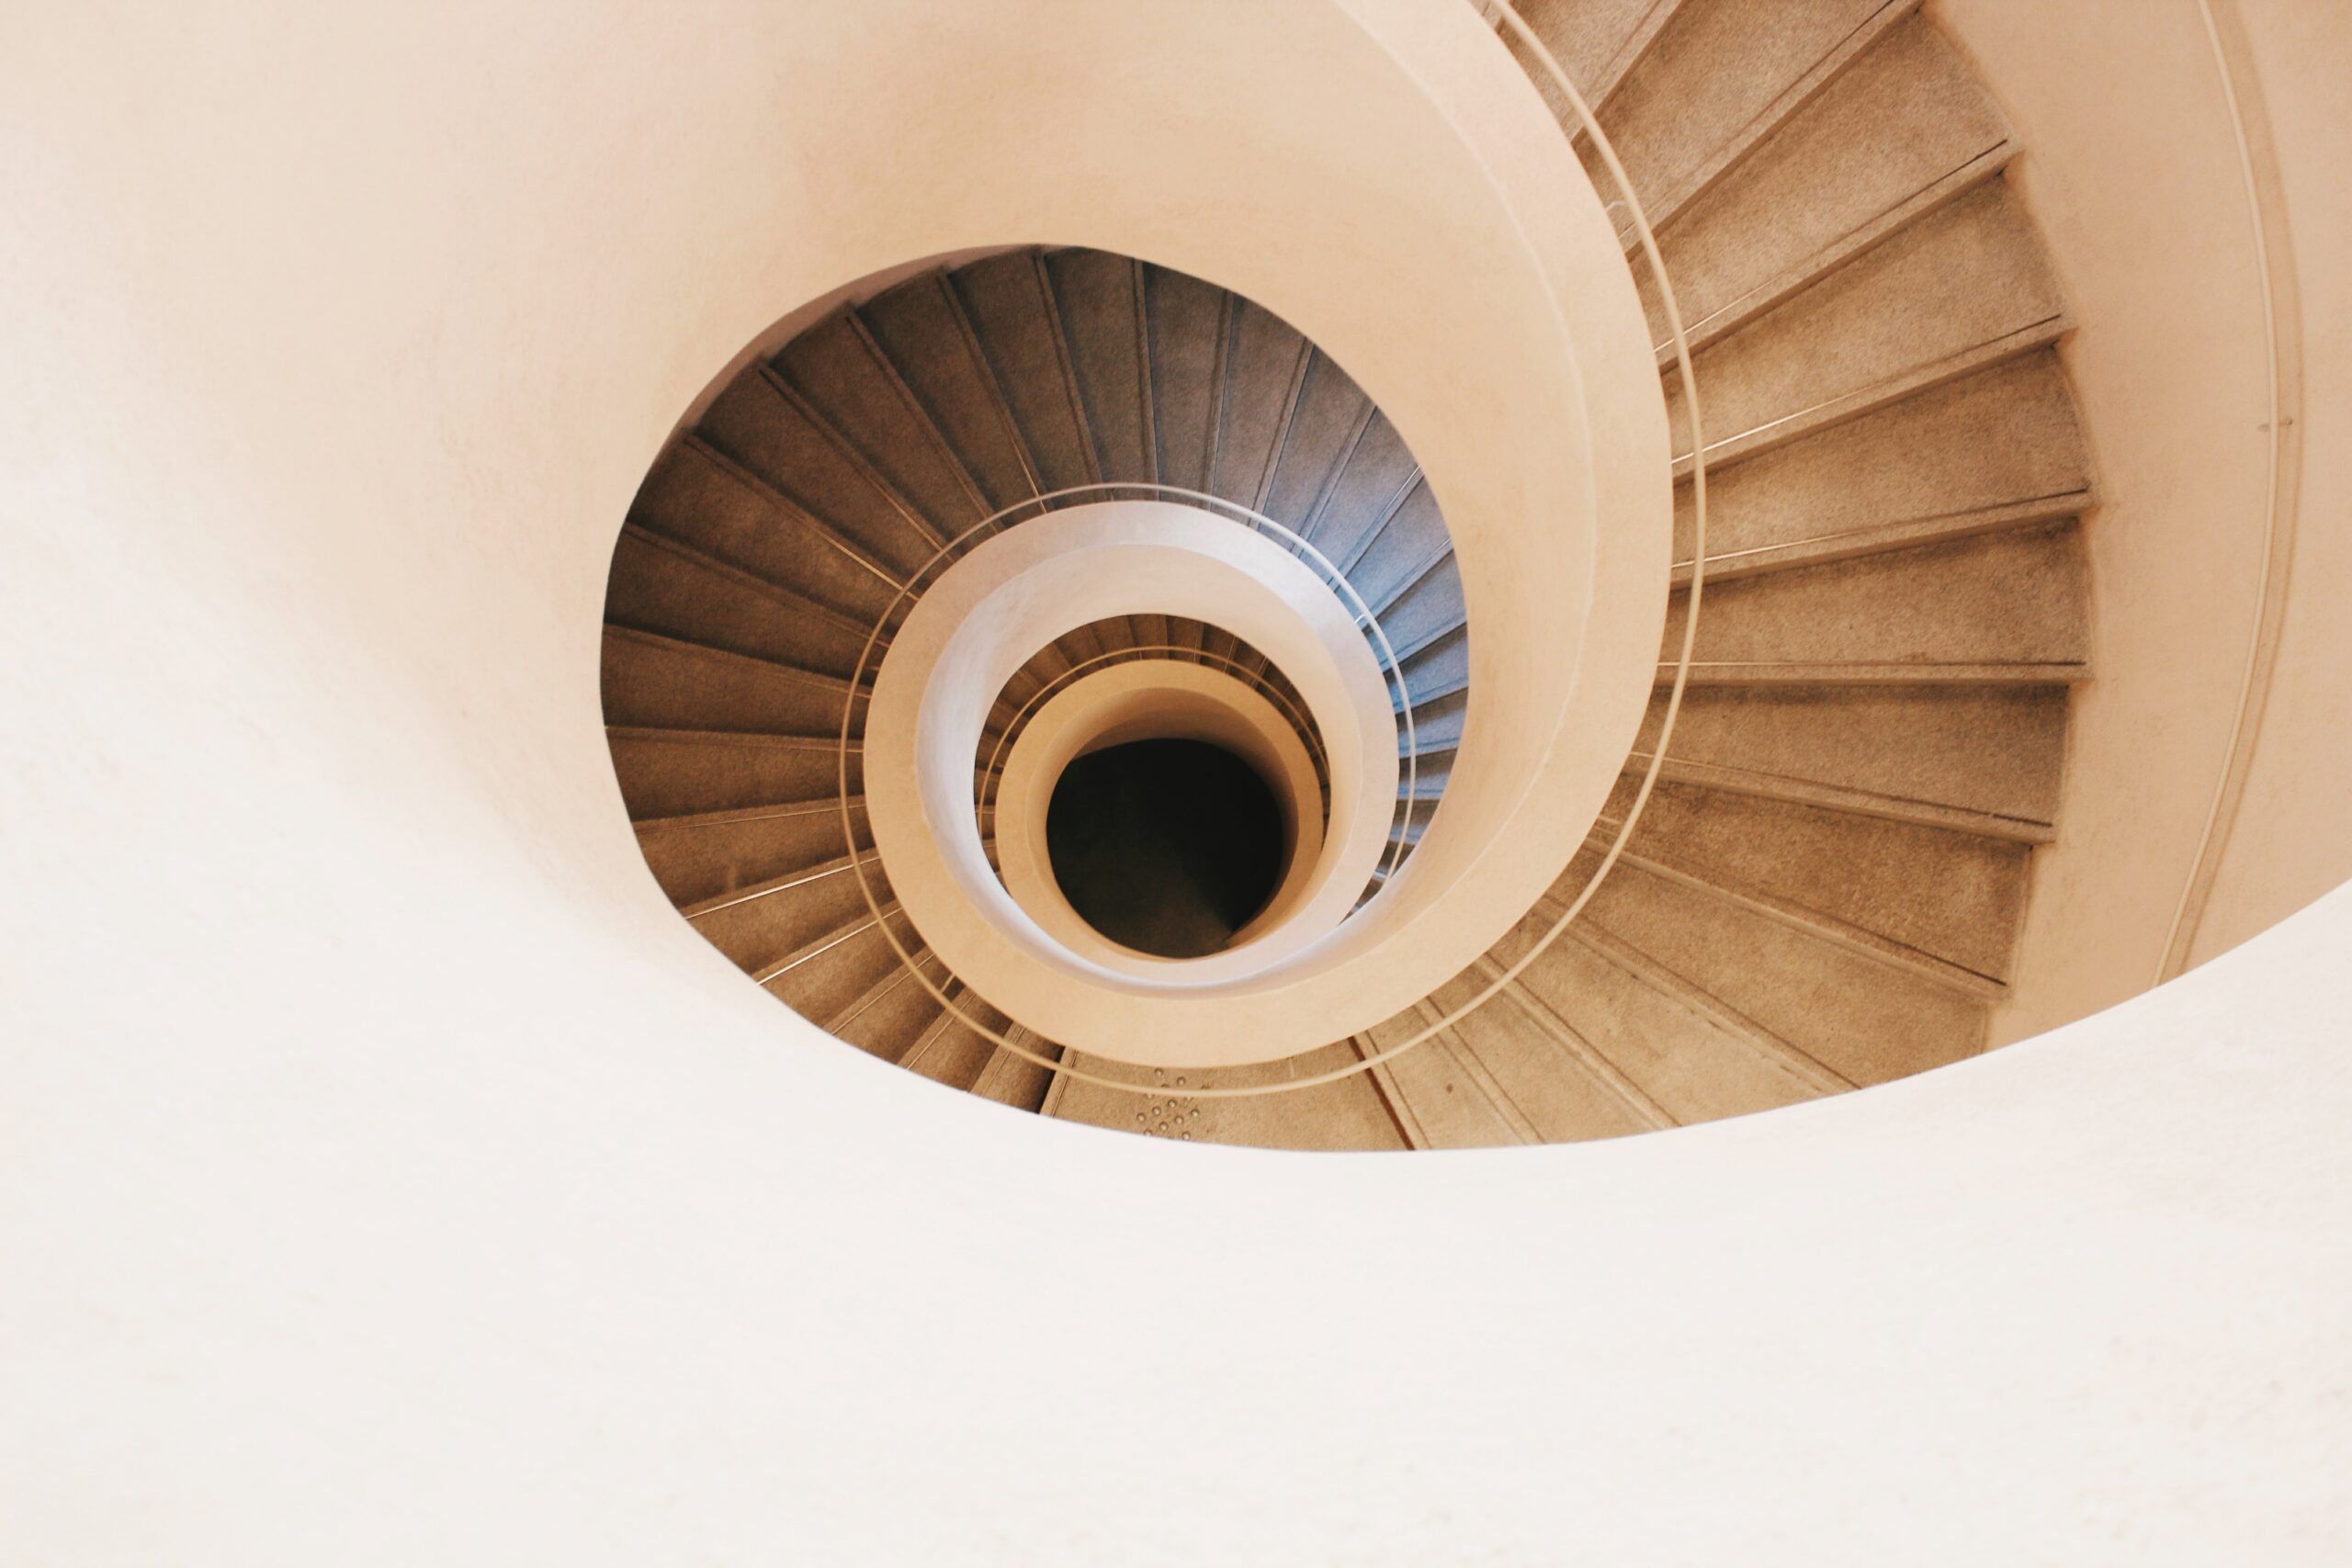 Winding staircase with stair eye